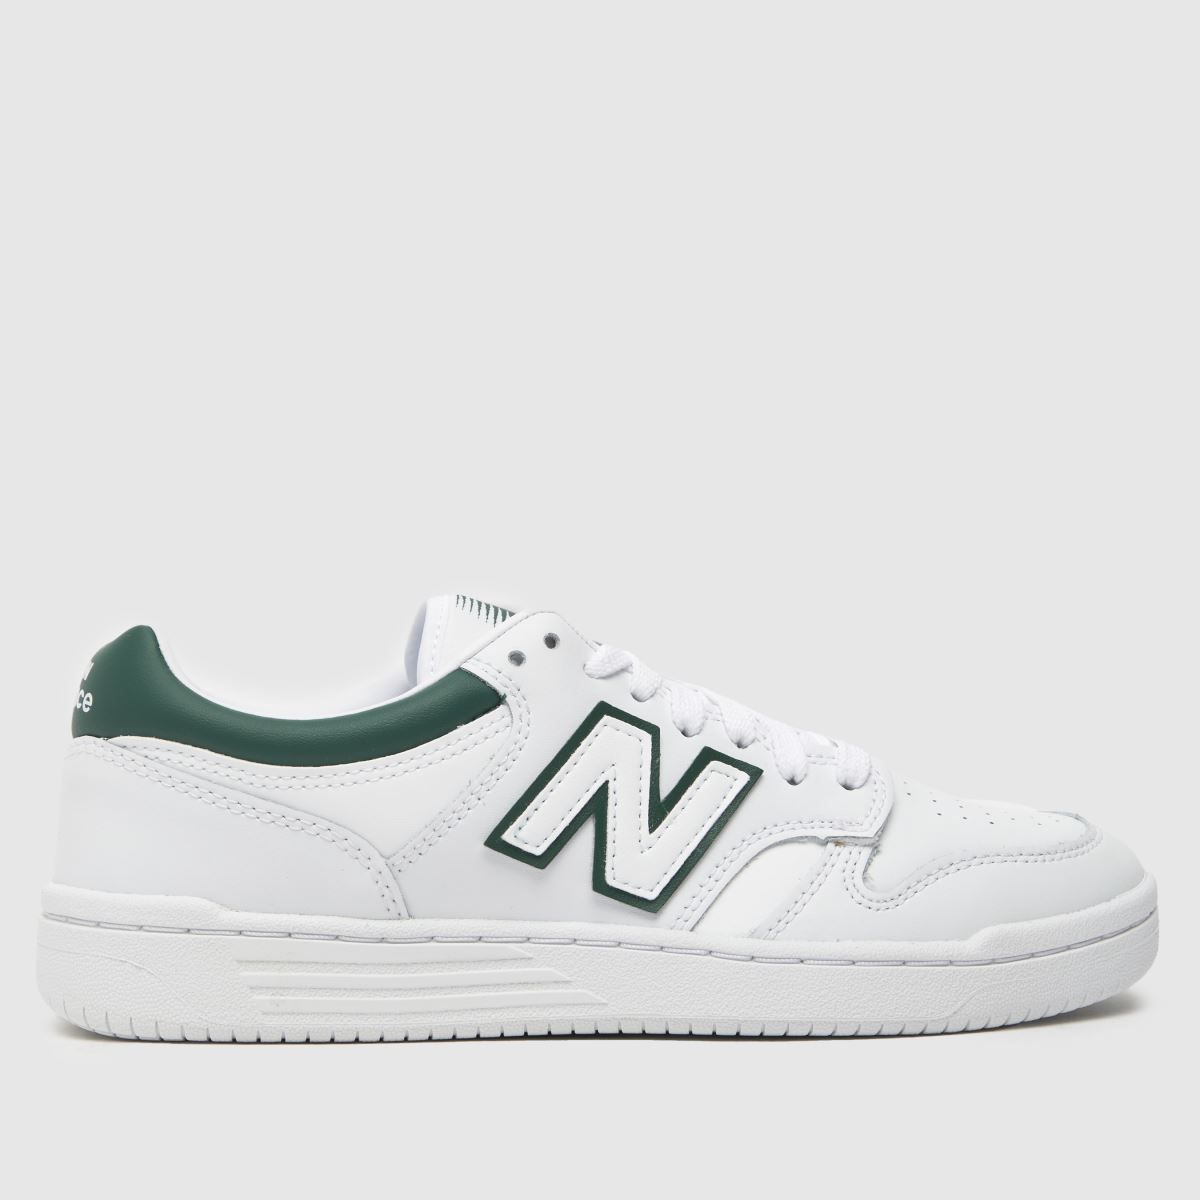 New Balance 480 trainers in white & green | Schuh